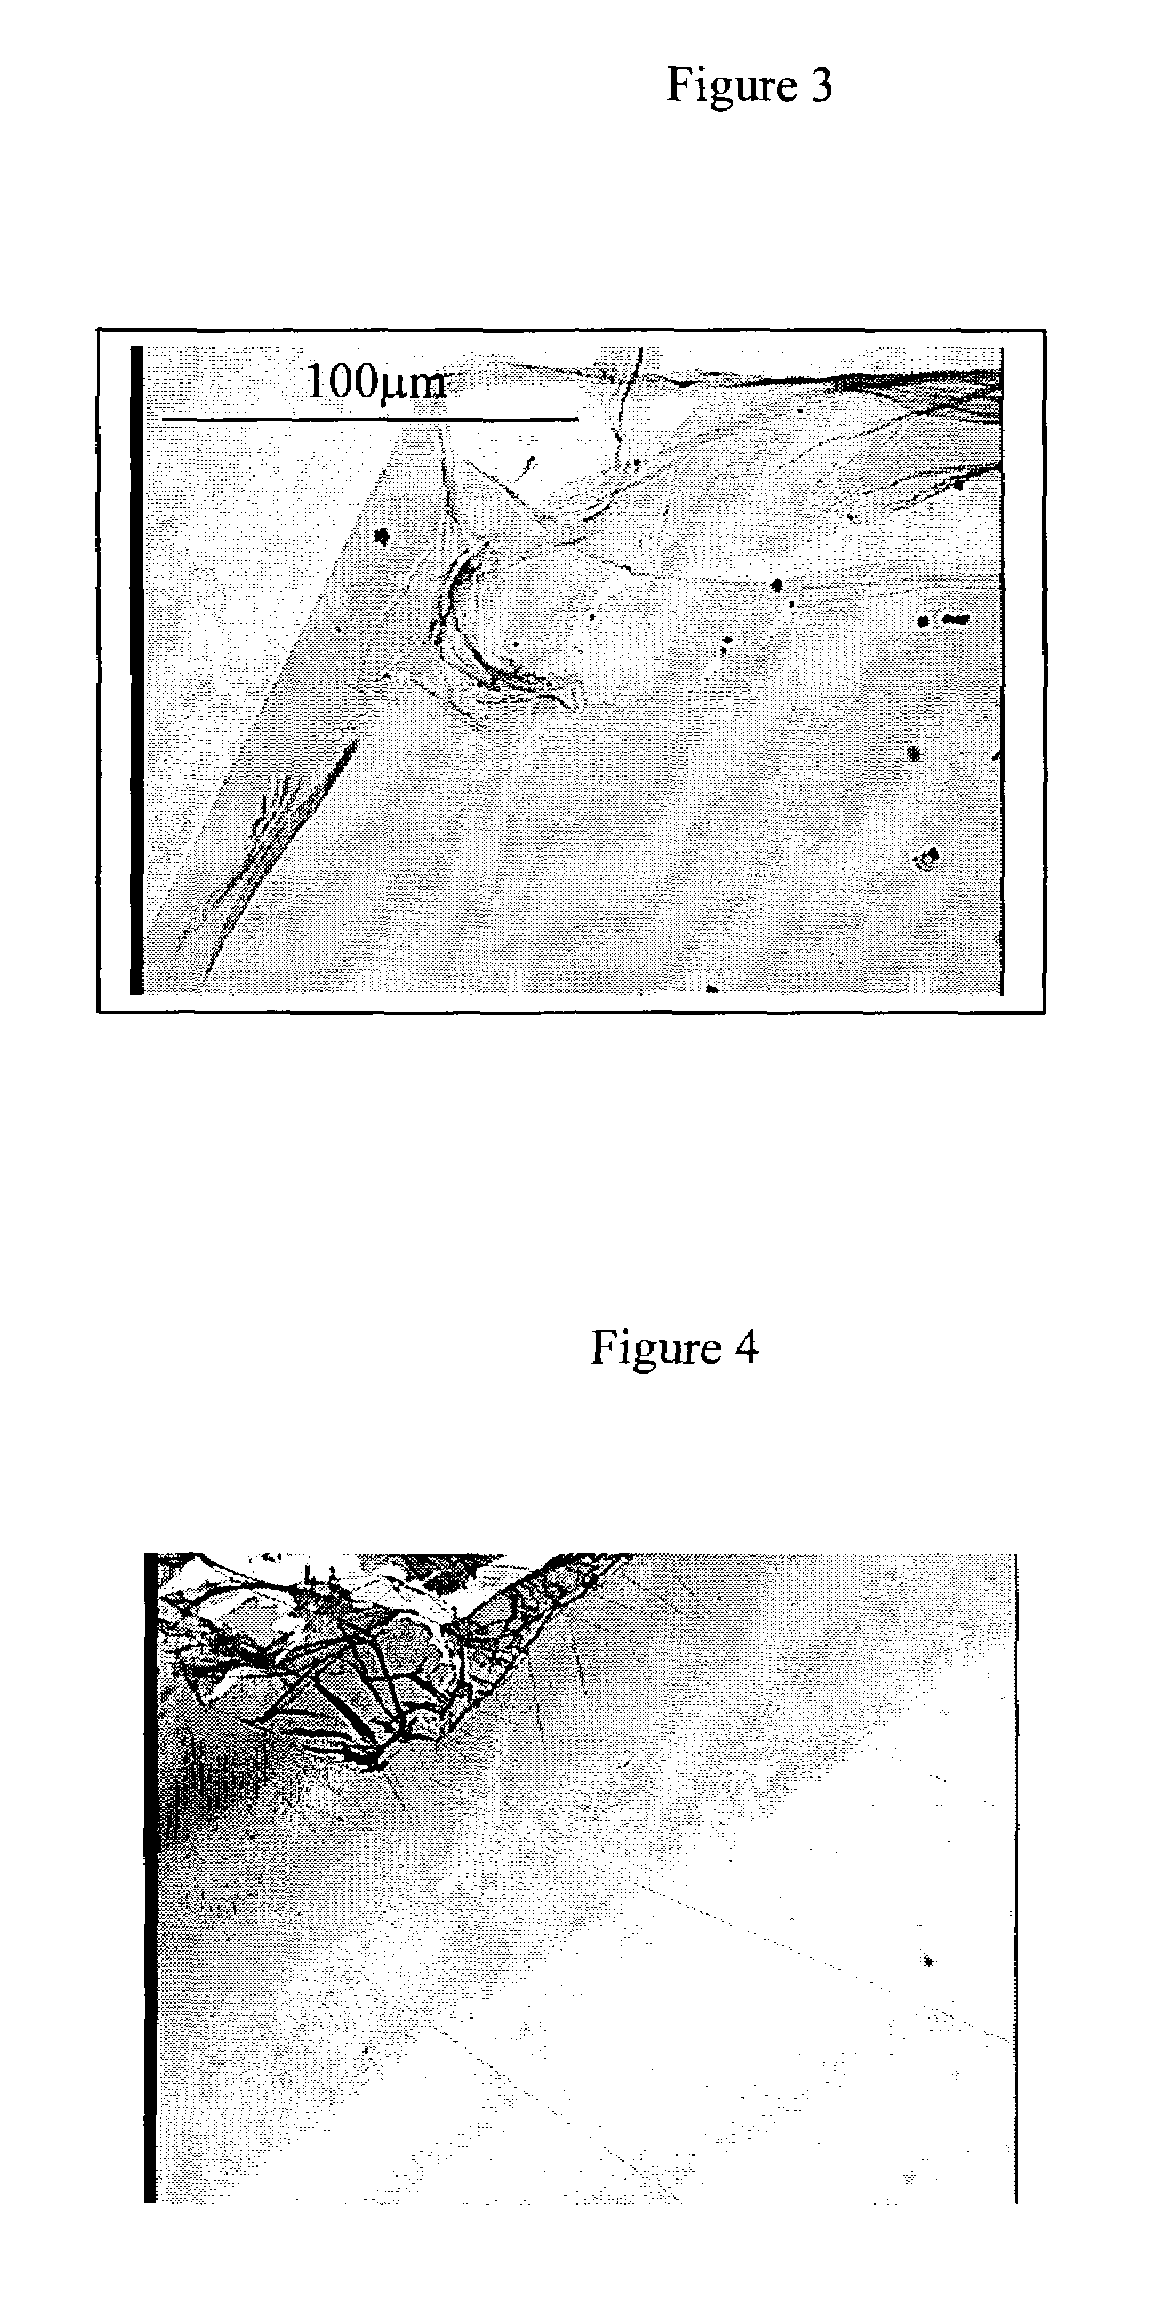 Single-wall carbon nanotube film having high modulus and conductivity and process for making the same